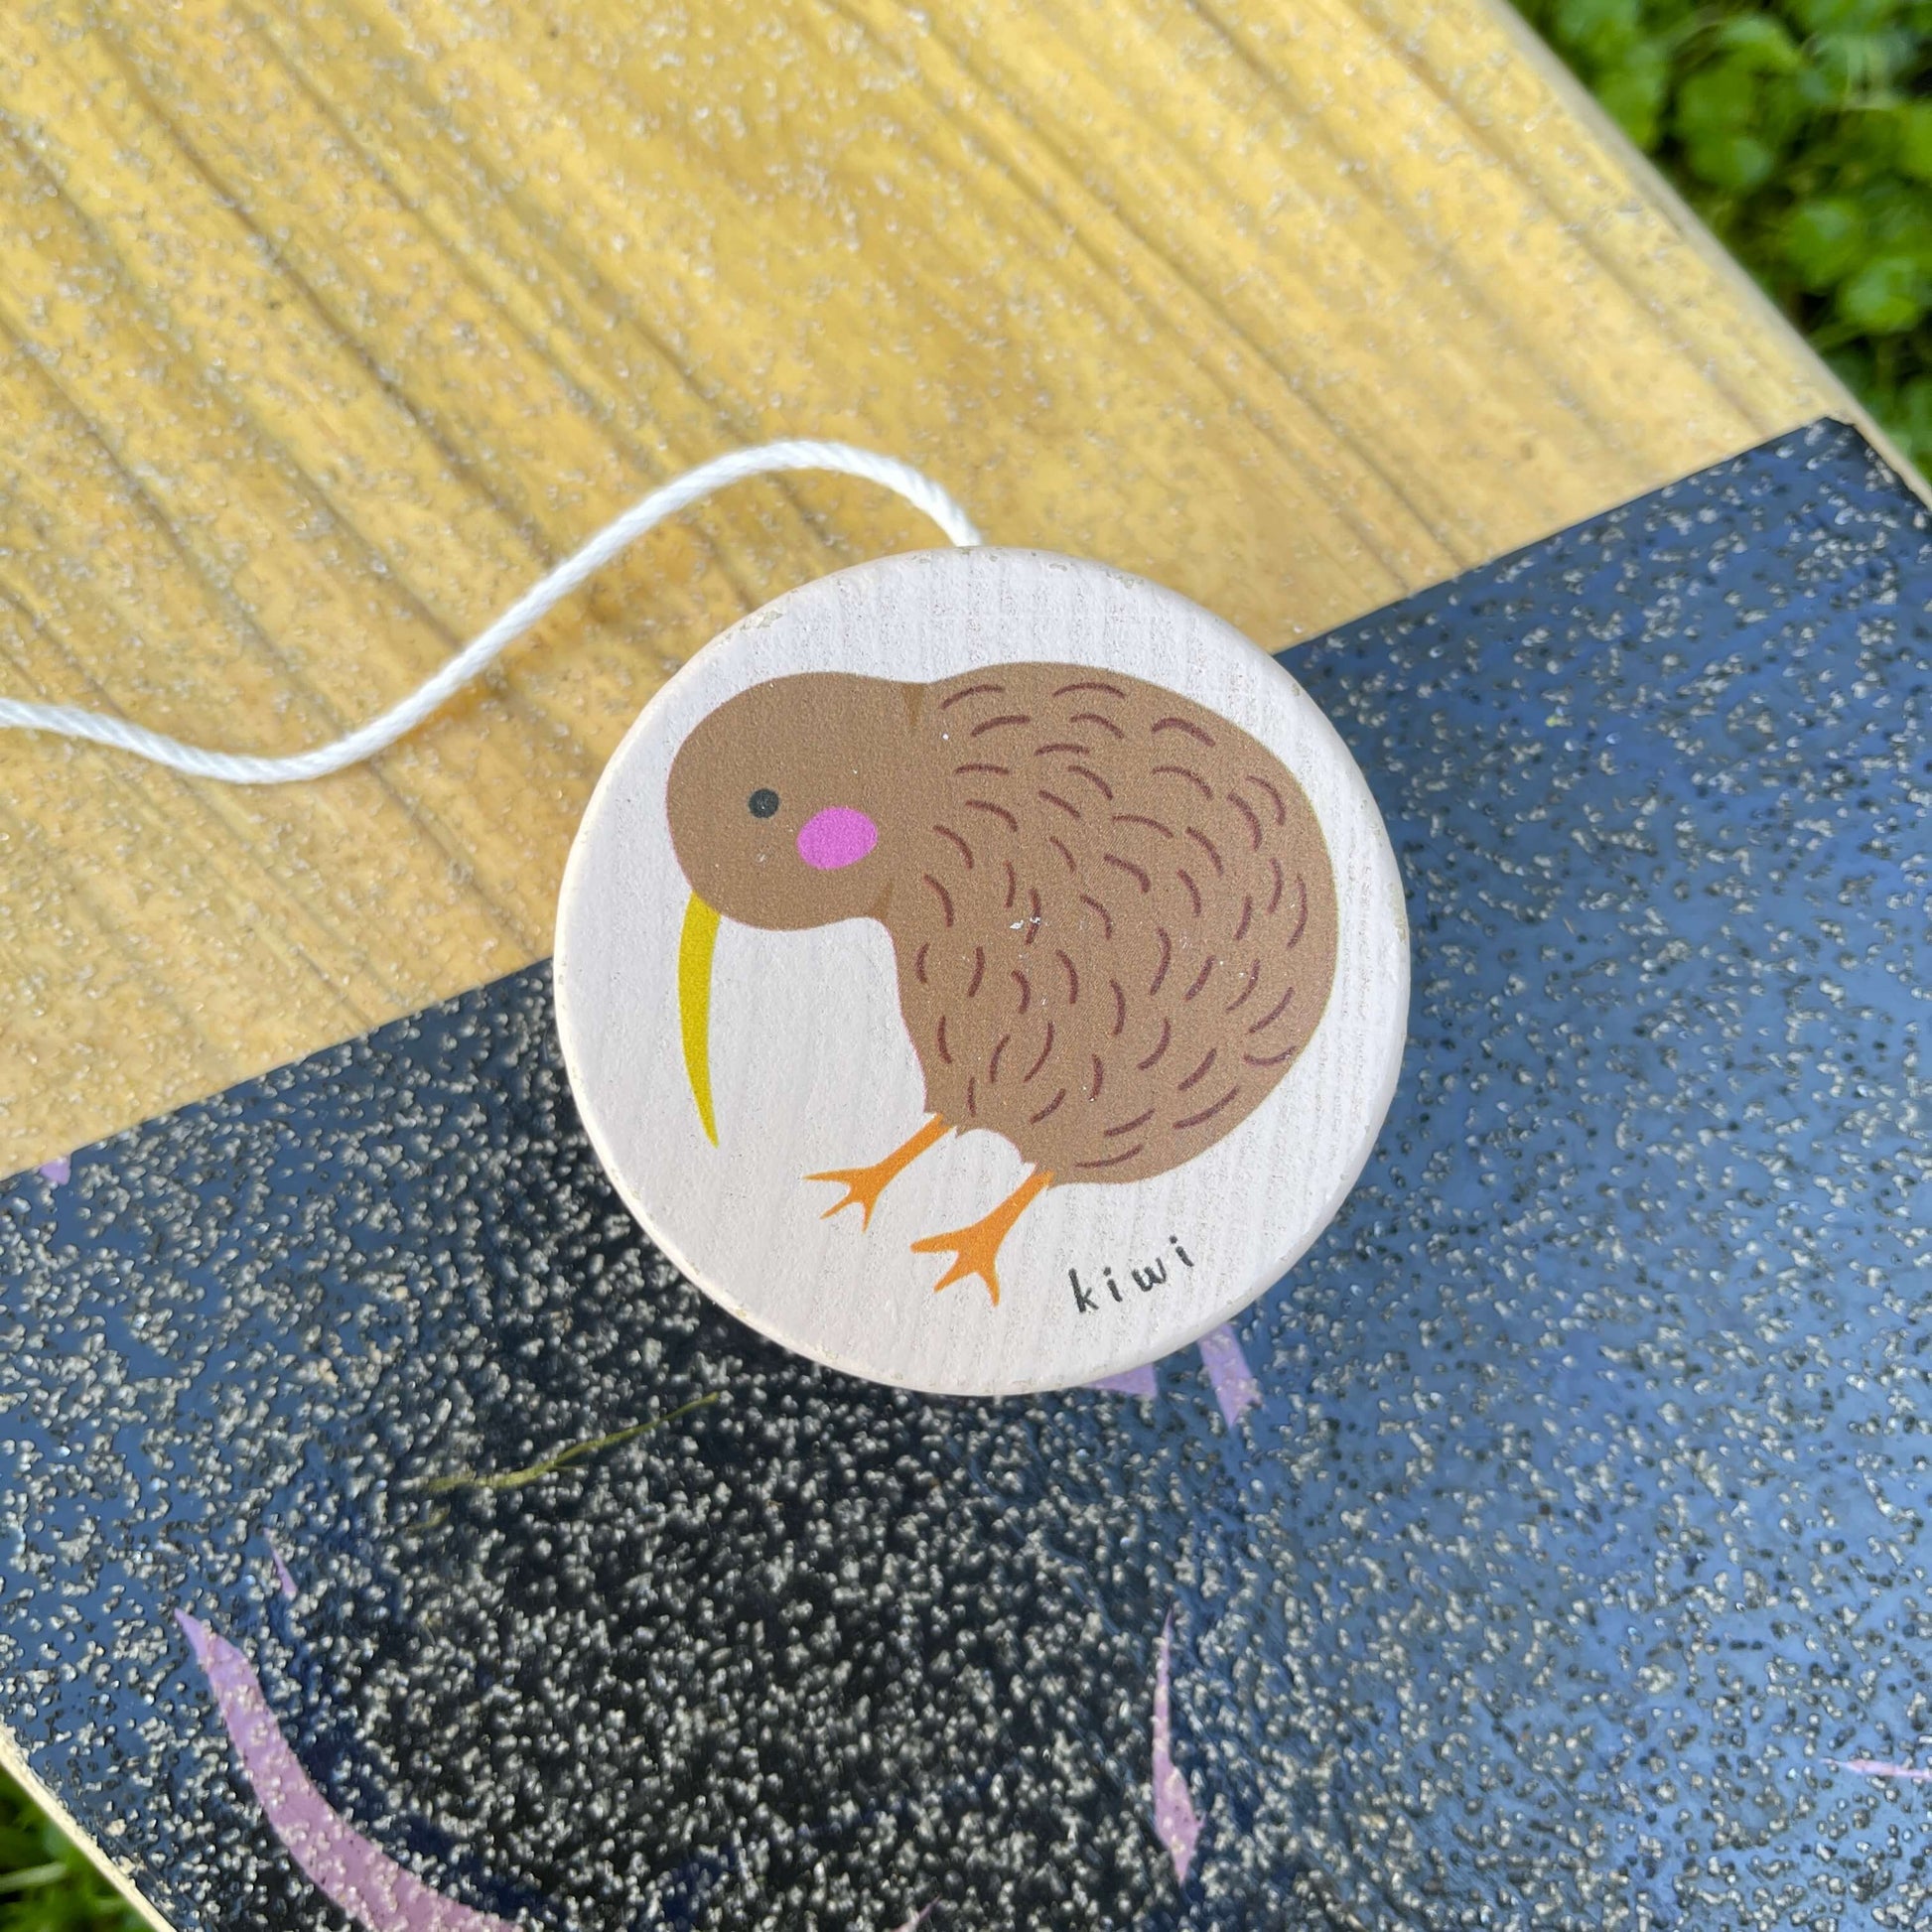 Pale pink wooden yoyo with a Kiwi bird painted on it sitting on a skateboard.